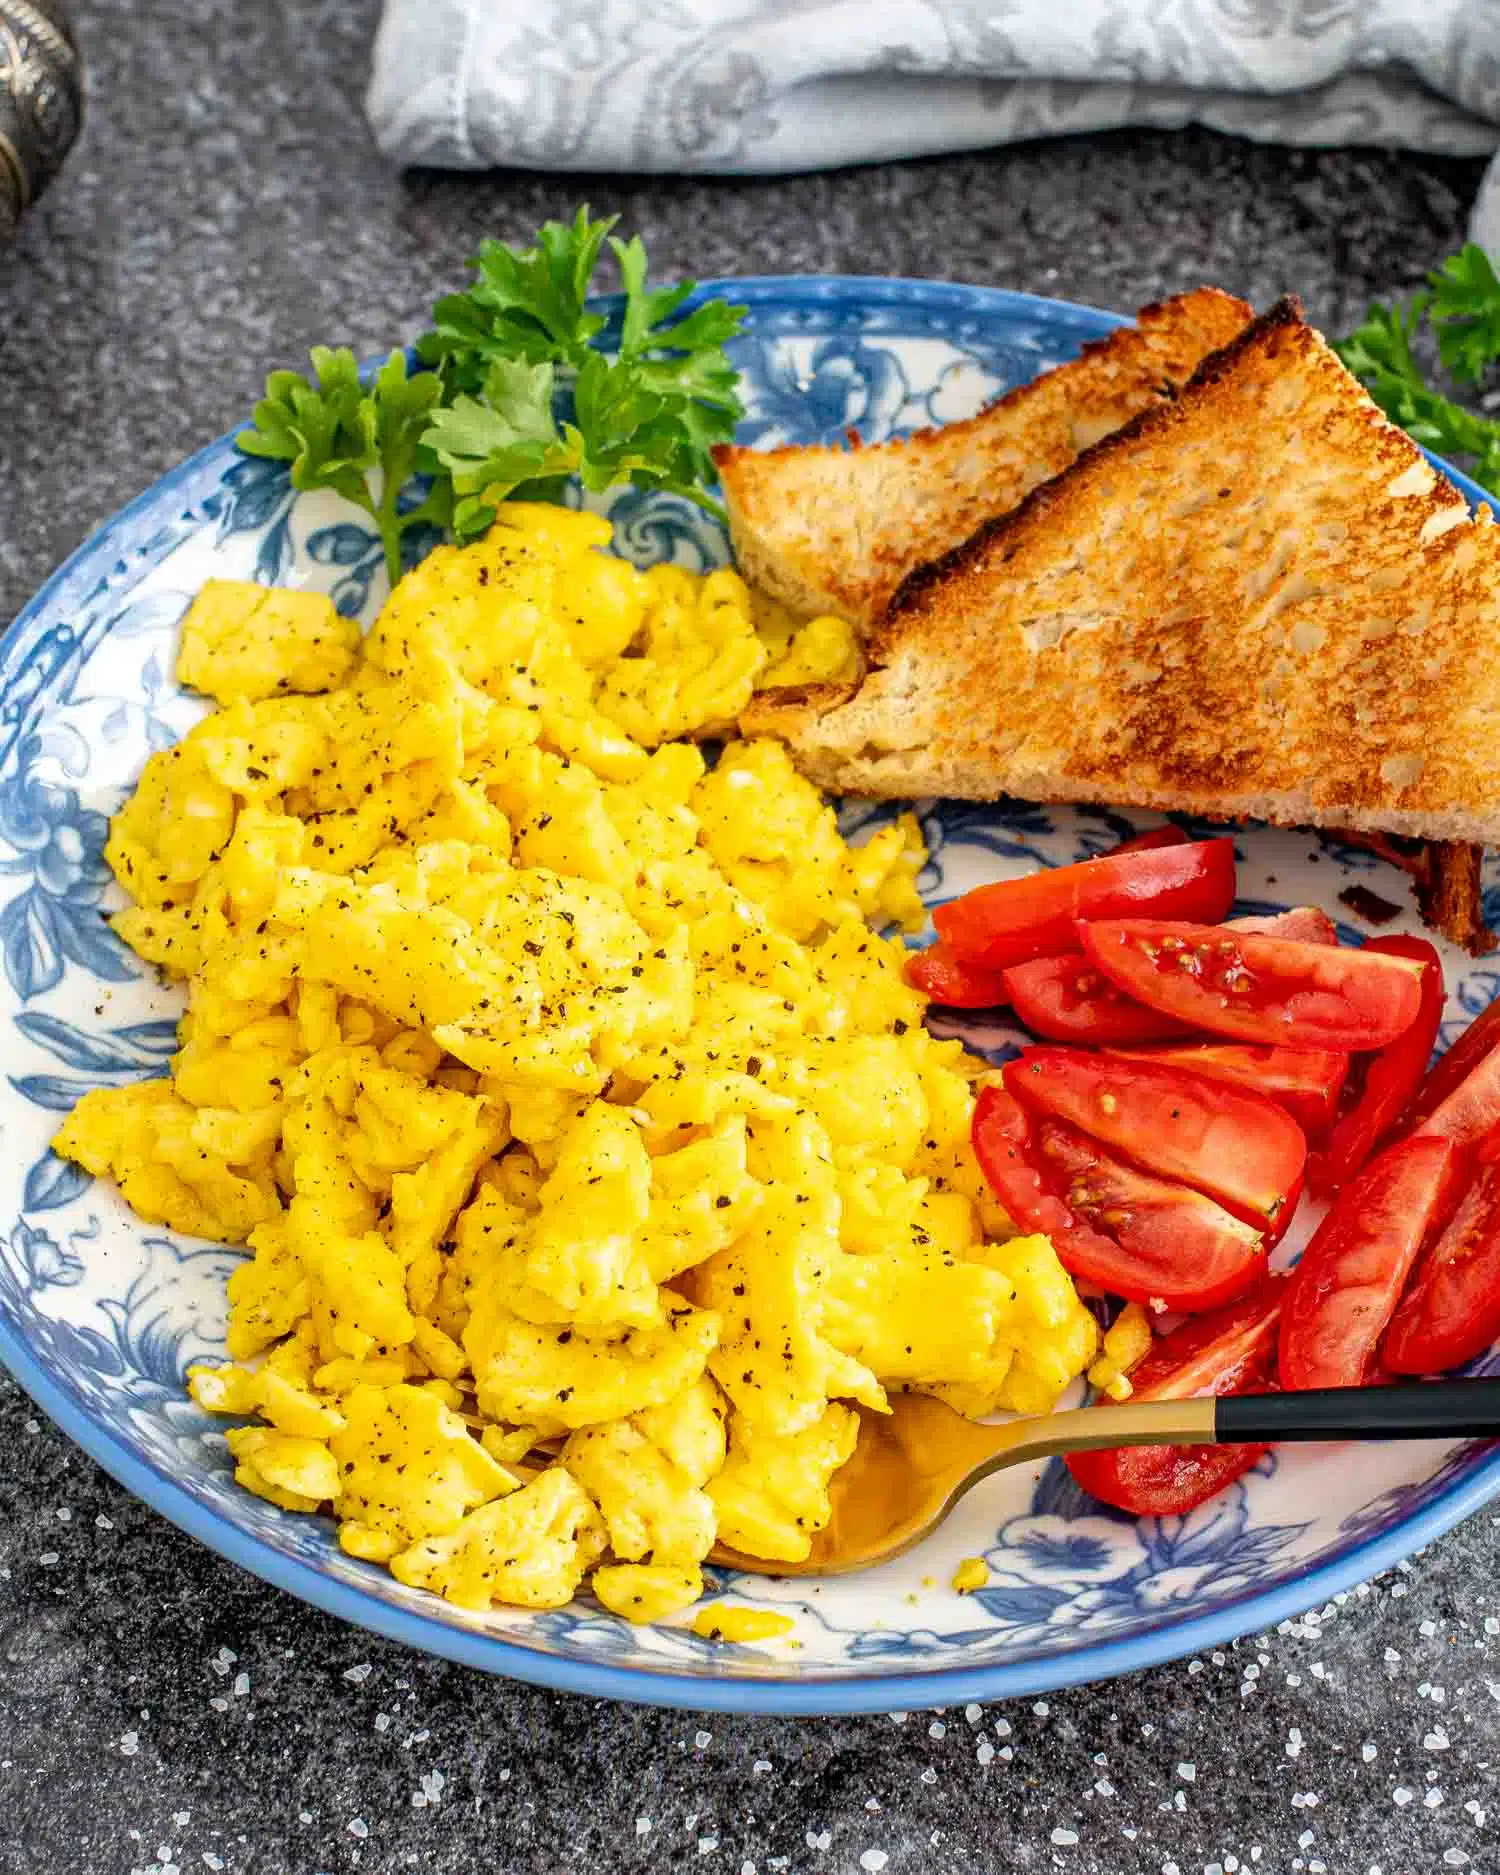 scrambled eggs with tomatoes and toast on a blue plate.